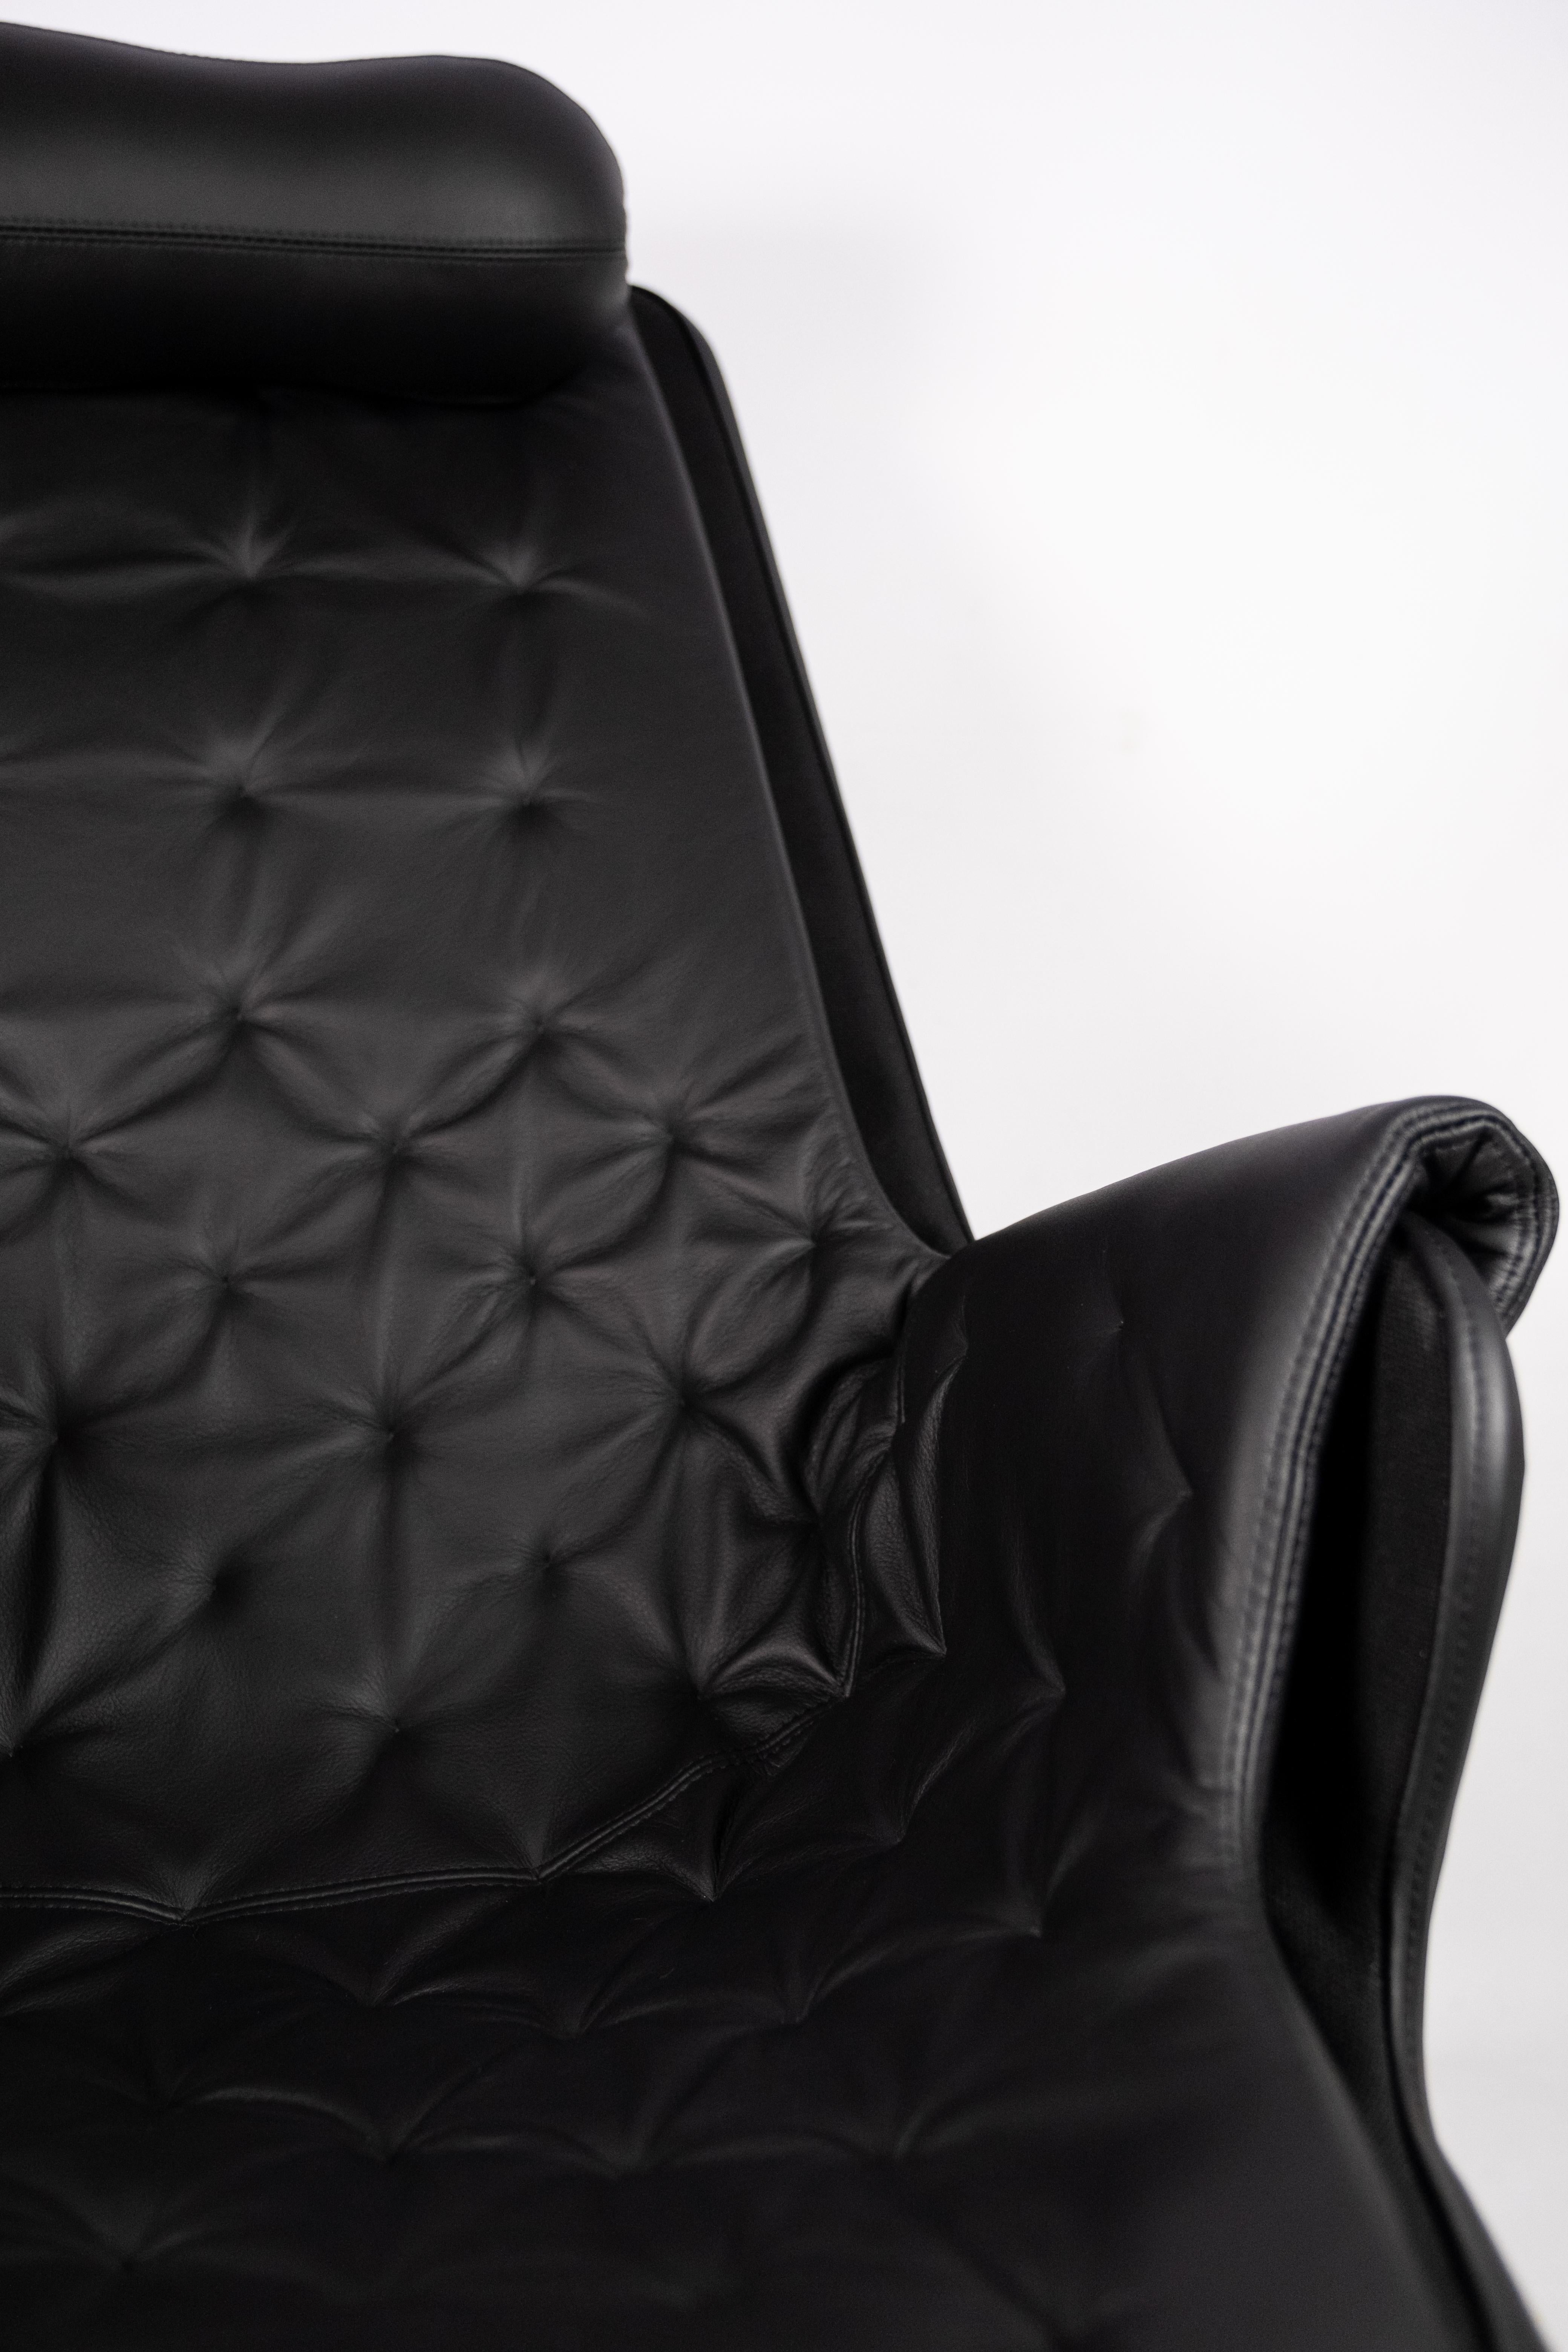 Mid-20th Century Easy Chair, Model Jetson 69, in Black Leather Designed by Bruno Mathsson, 1970s